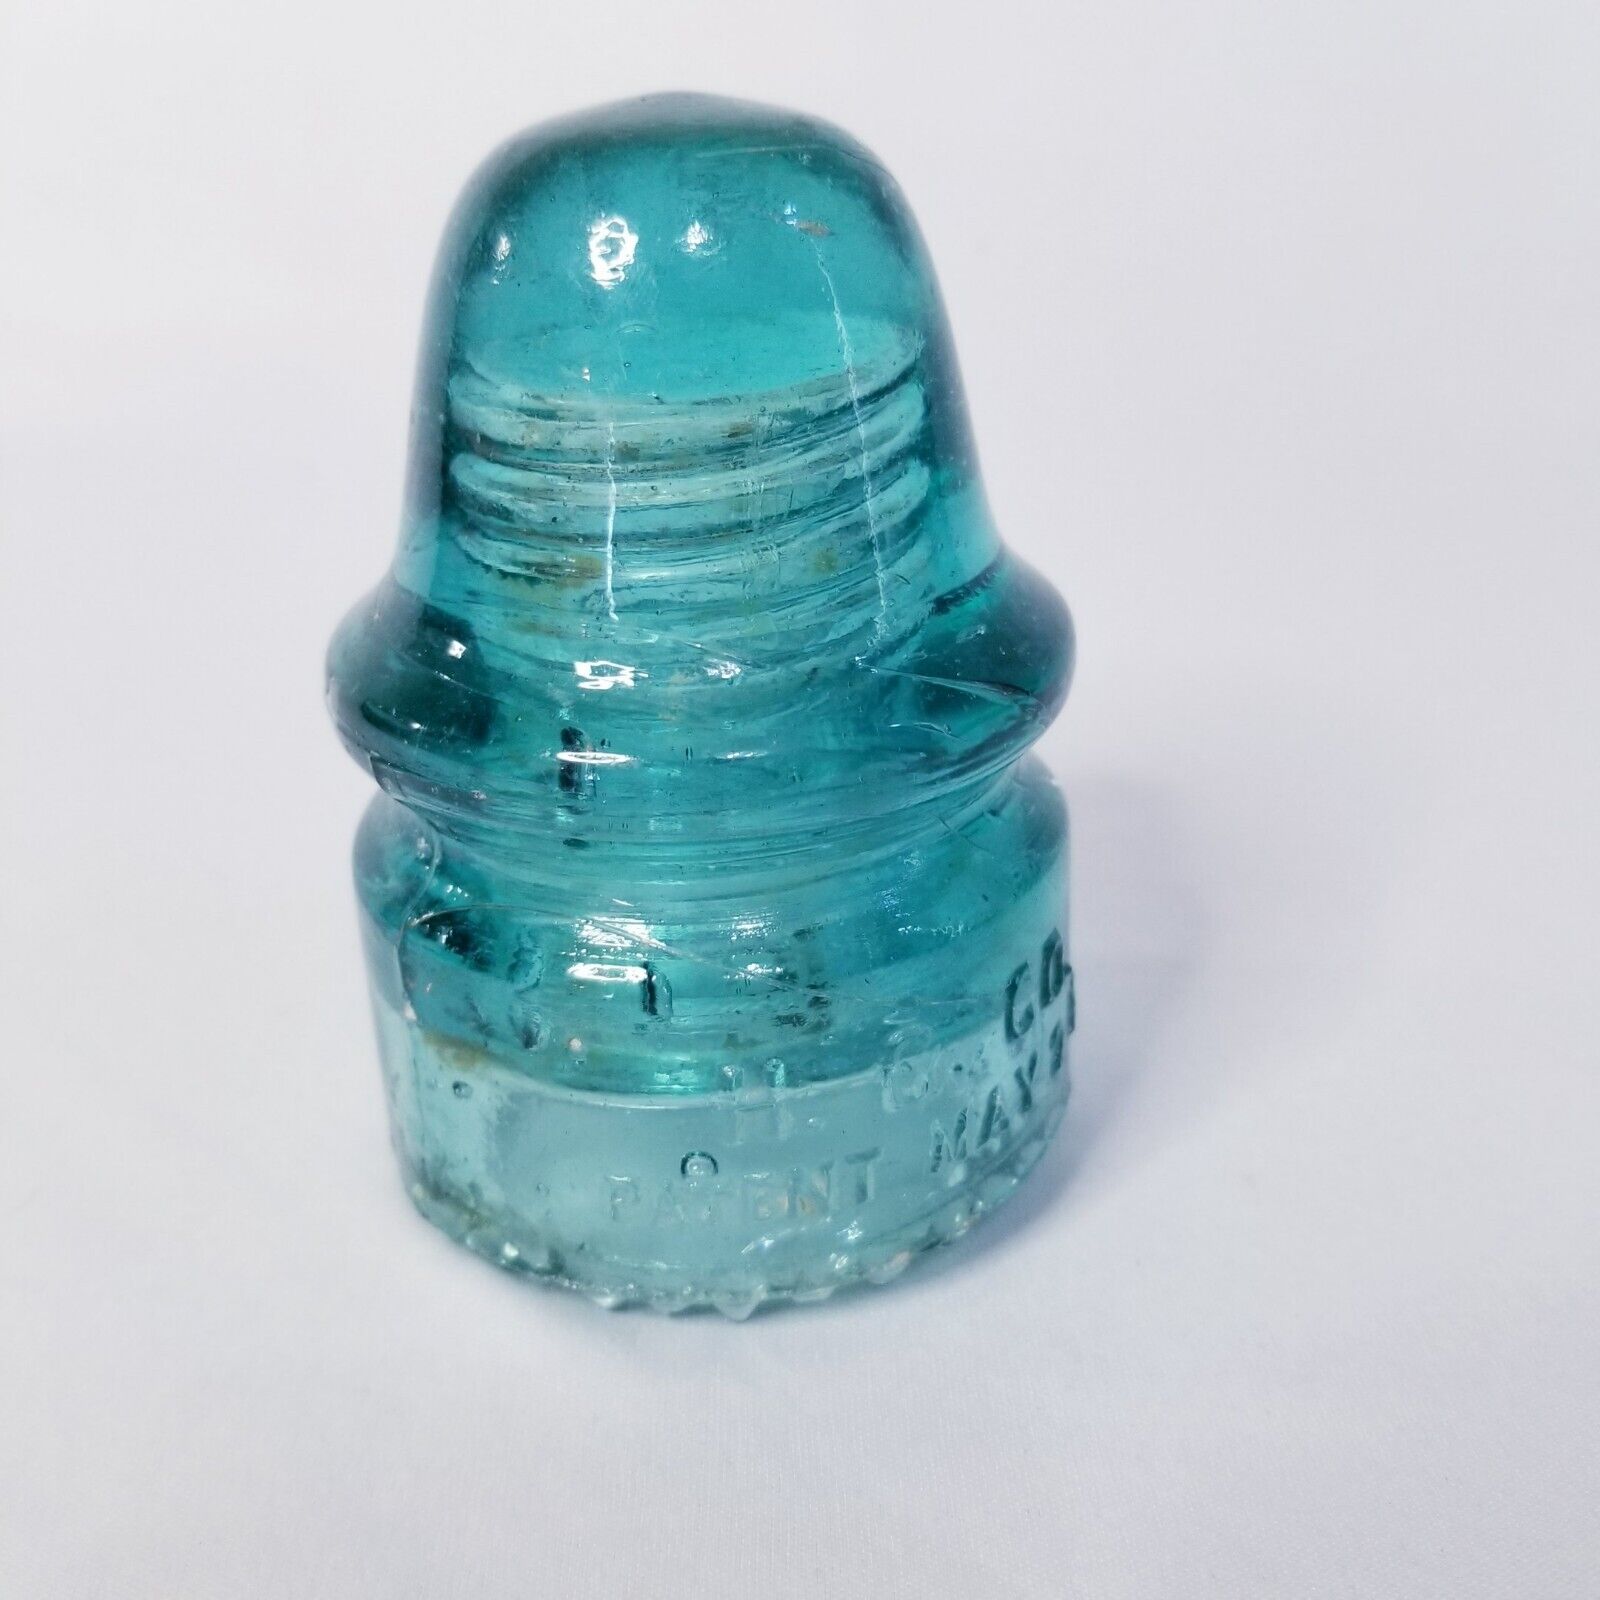 Vintage H. G. Co. Petticoat Green Glass Insulator Patent May 2, 1893